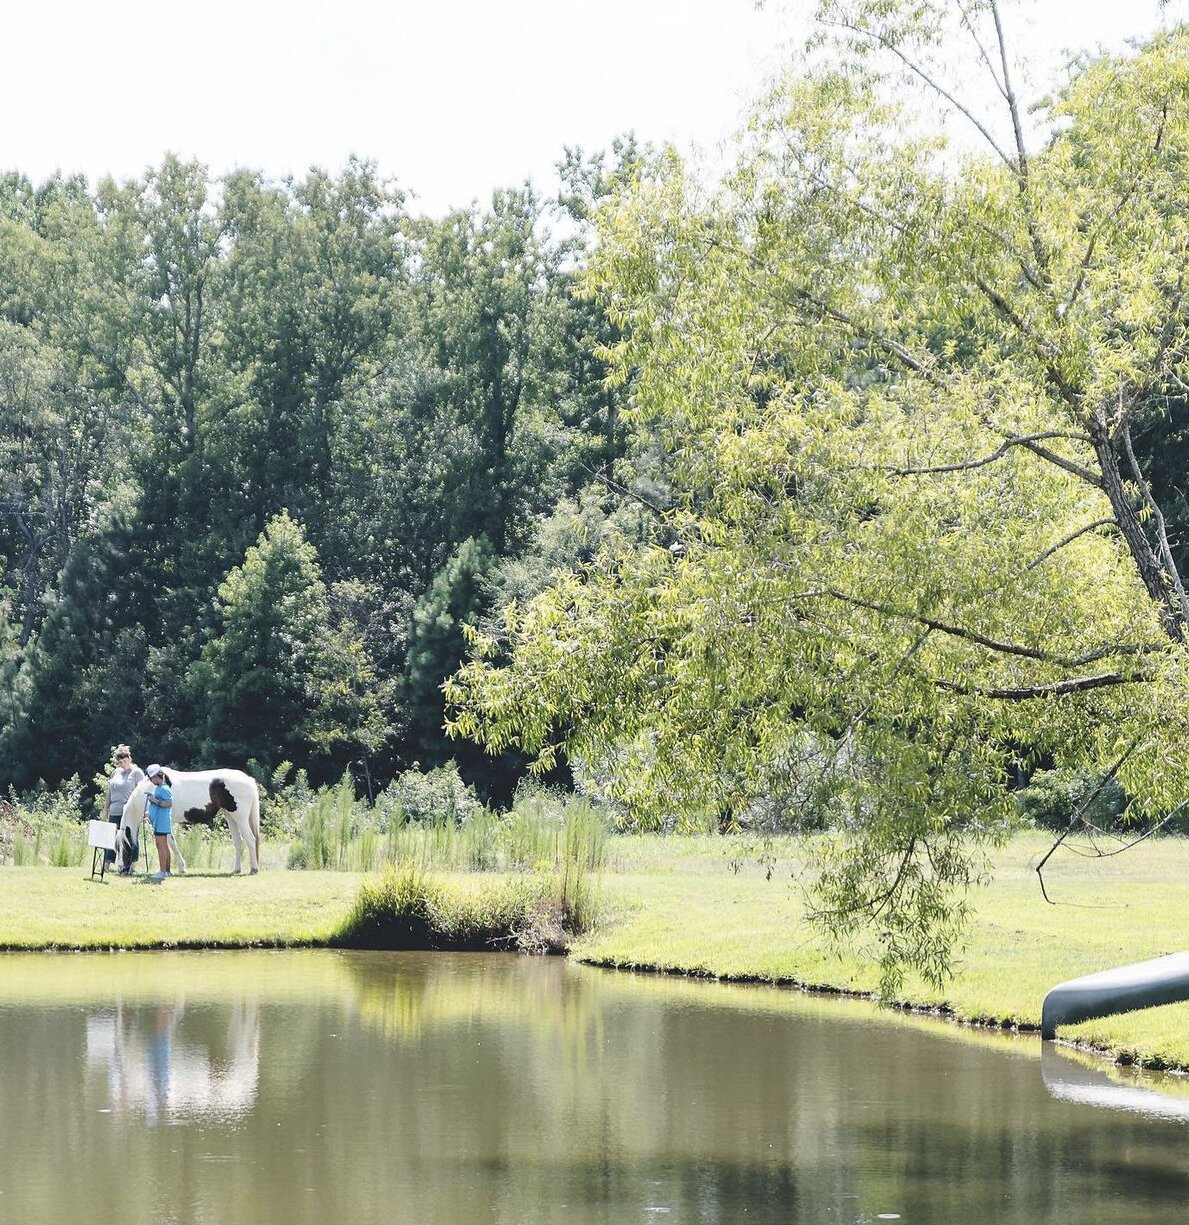 Child, adult and horse beside a pond overhung by a weeping willow tree